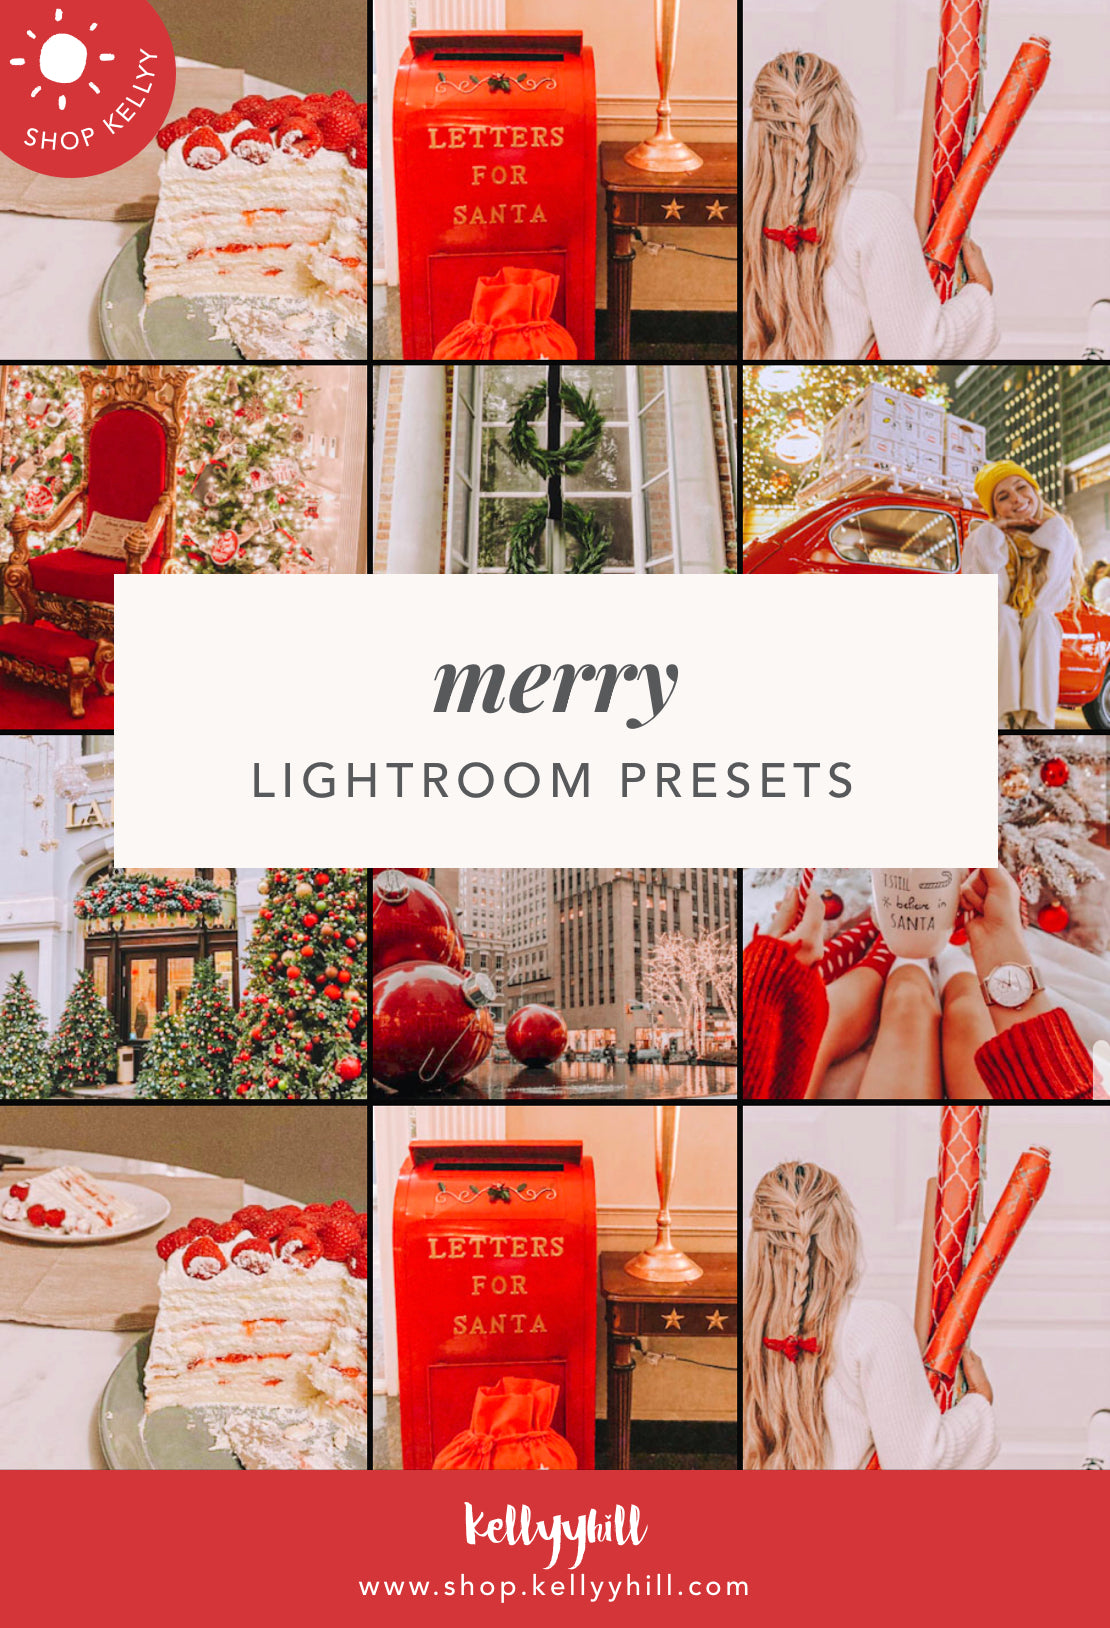 Holiday Mobile Preset Collection